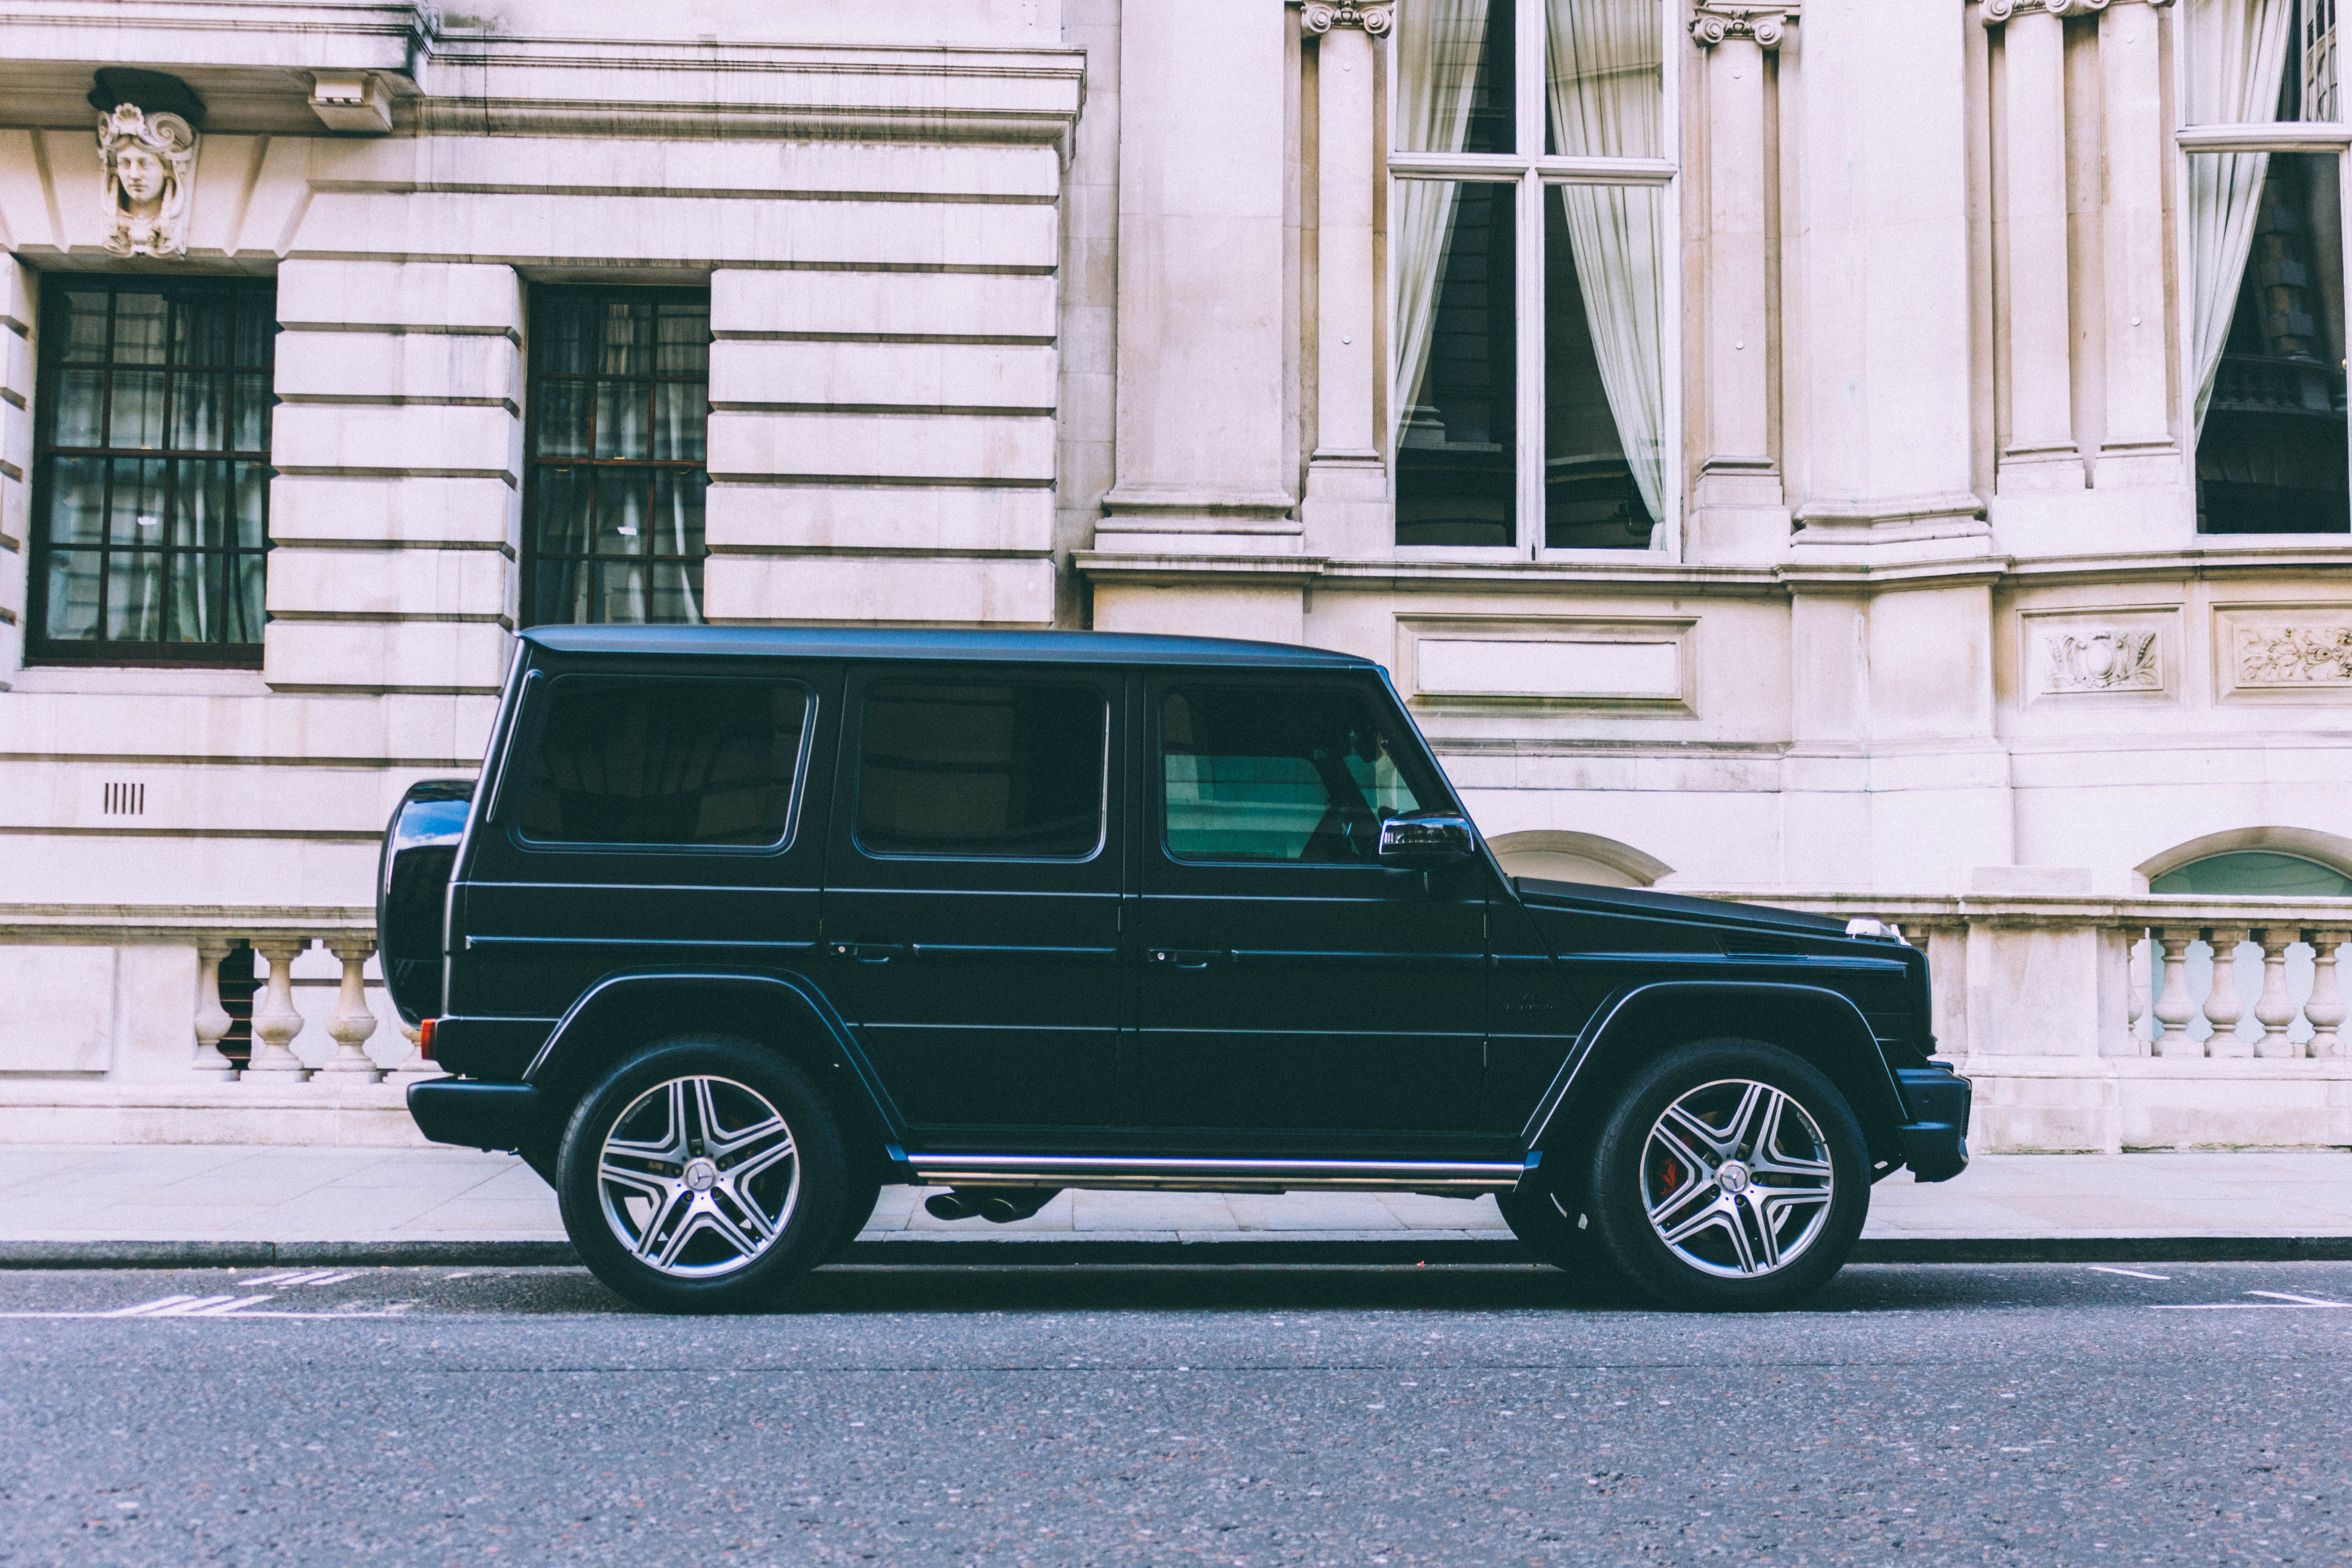 Popular G Class Image for Phone